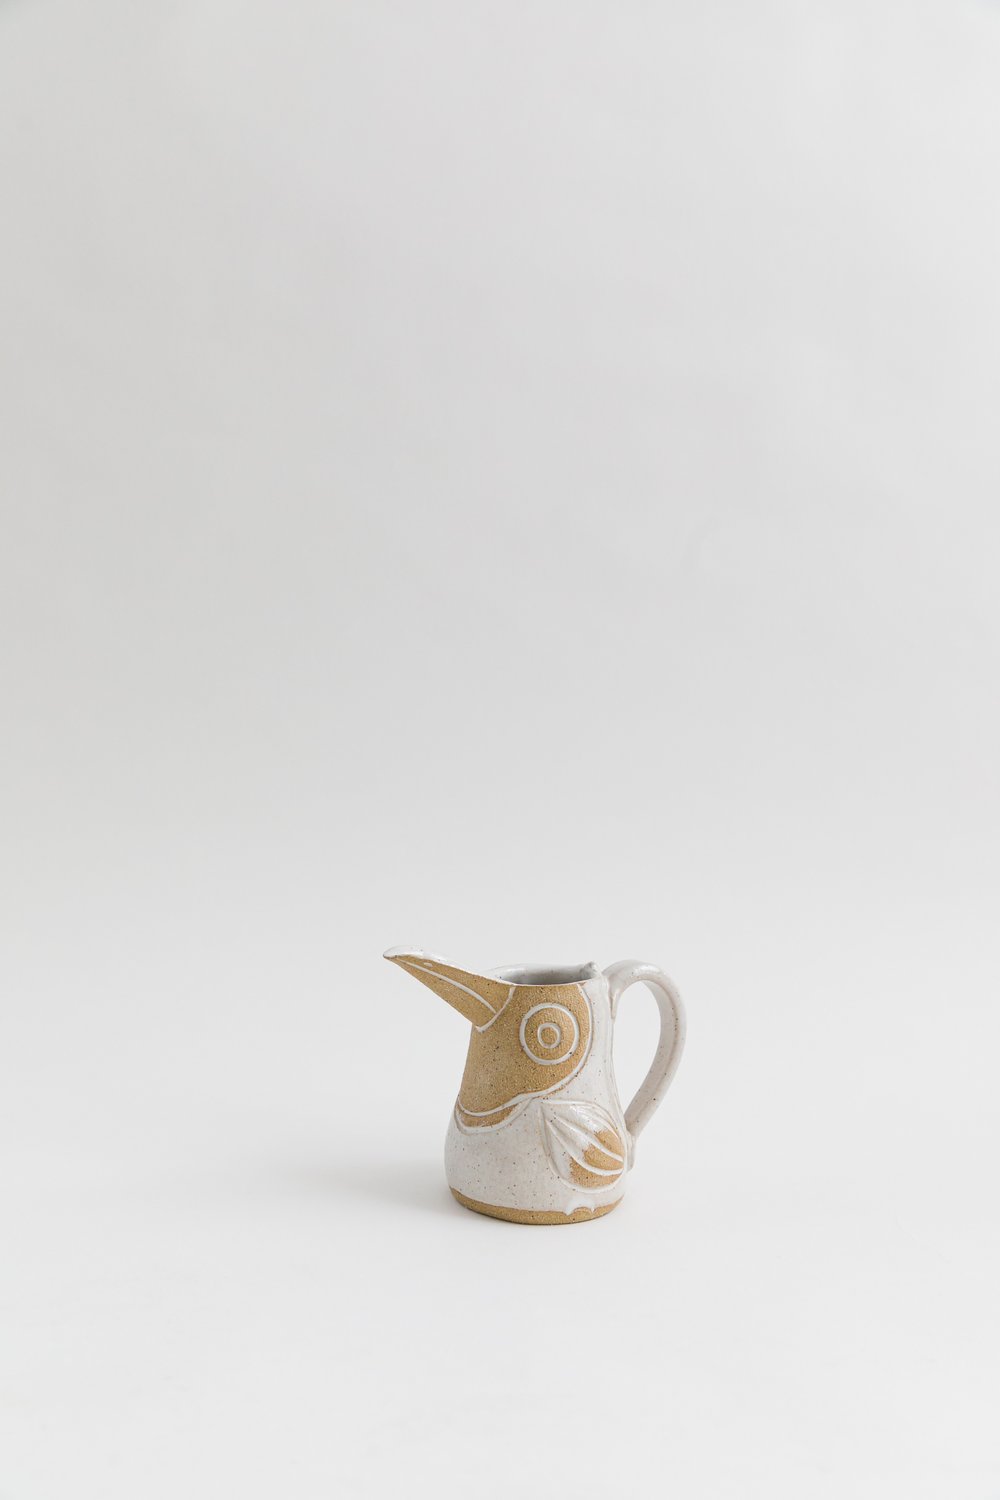 Image of Matte White Baby Toucan Creamer with Handle